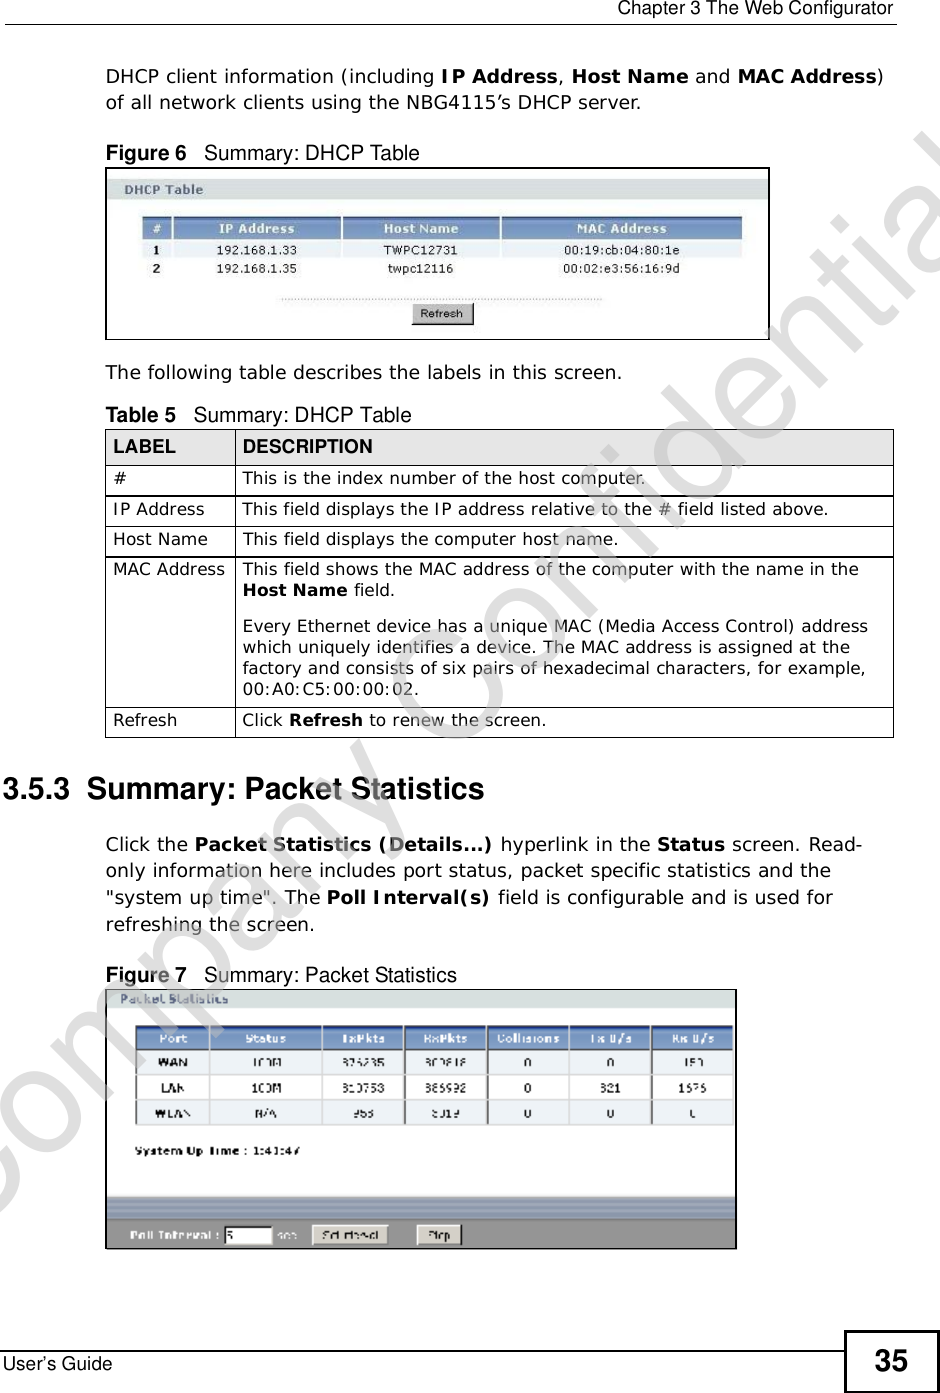  Chapter 3The Web ConfiguratorUser’s Guide 35DHCP client information (including IP Address,HostName and MAC Address)of all network clients using the NBG4115’s DHCP server.Figure 6   Summary: DHCP TableThe following table describes the labels in this screen.3.5.3  Summary: Packet Statistics   Click the Packet Statistics (Details...) hyperlink in the Status screen. Read-only information here includes port status, packet specific statistics and the &quot;system up time&quot;. The Poll Interval(s) field is configurable and is used for refreshing the screen.Figure 7   Summary: Packet Statistics Table 5   Summary: DHCP TableLABEL  DESCRIPTION# This is the index number of the host computer.IP AddressThis field displays the IP address relative to the # field listed above.Host Name This field displays the computer host name.MAC AddressThis field shows the MAC address of the computer with the name in the Host Name field.Every Ethernet device has a unique MAC (Media Access Control) address which uniquely identifies a device. The MAC address is assigned at the factory and consists of six pairs of hexadecimal characters, for example, 00:A0:C5:00:00:02.RefreshClick Refresh to renew the screen. Company Confidential